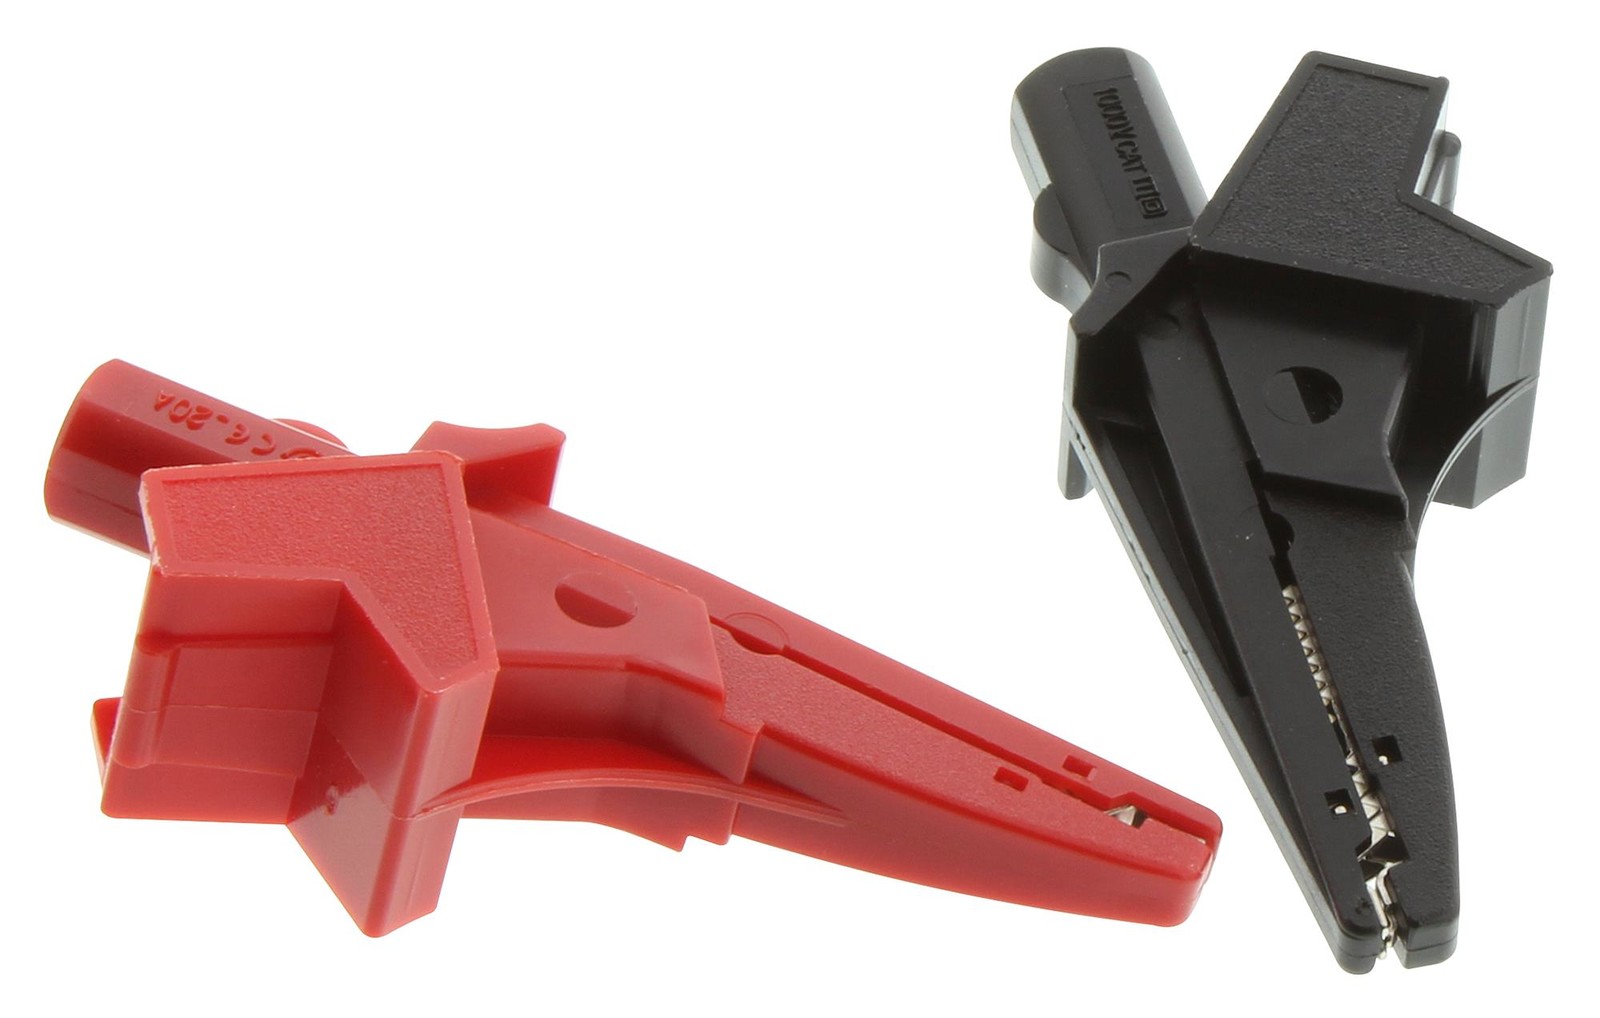 Cal Test Electronics Ct2490A Insulated Alligator Clip Set - Blk, Red